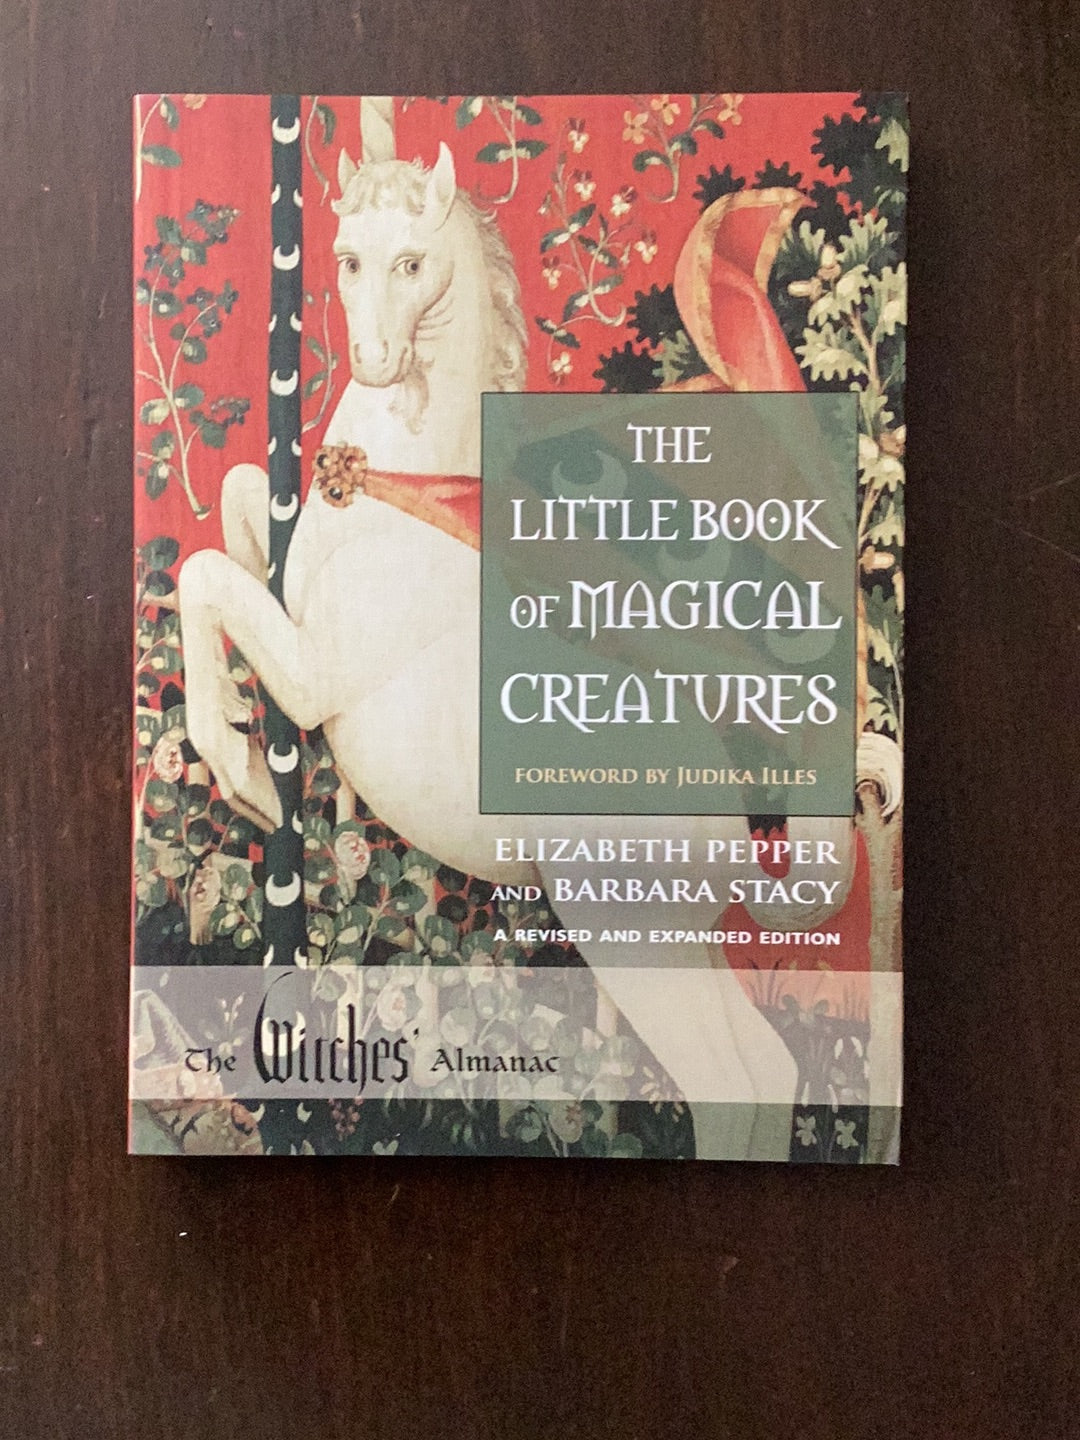 The little book of magical creatures